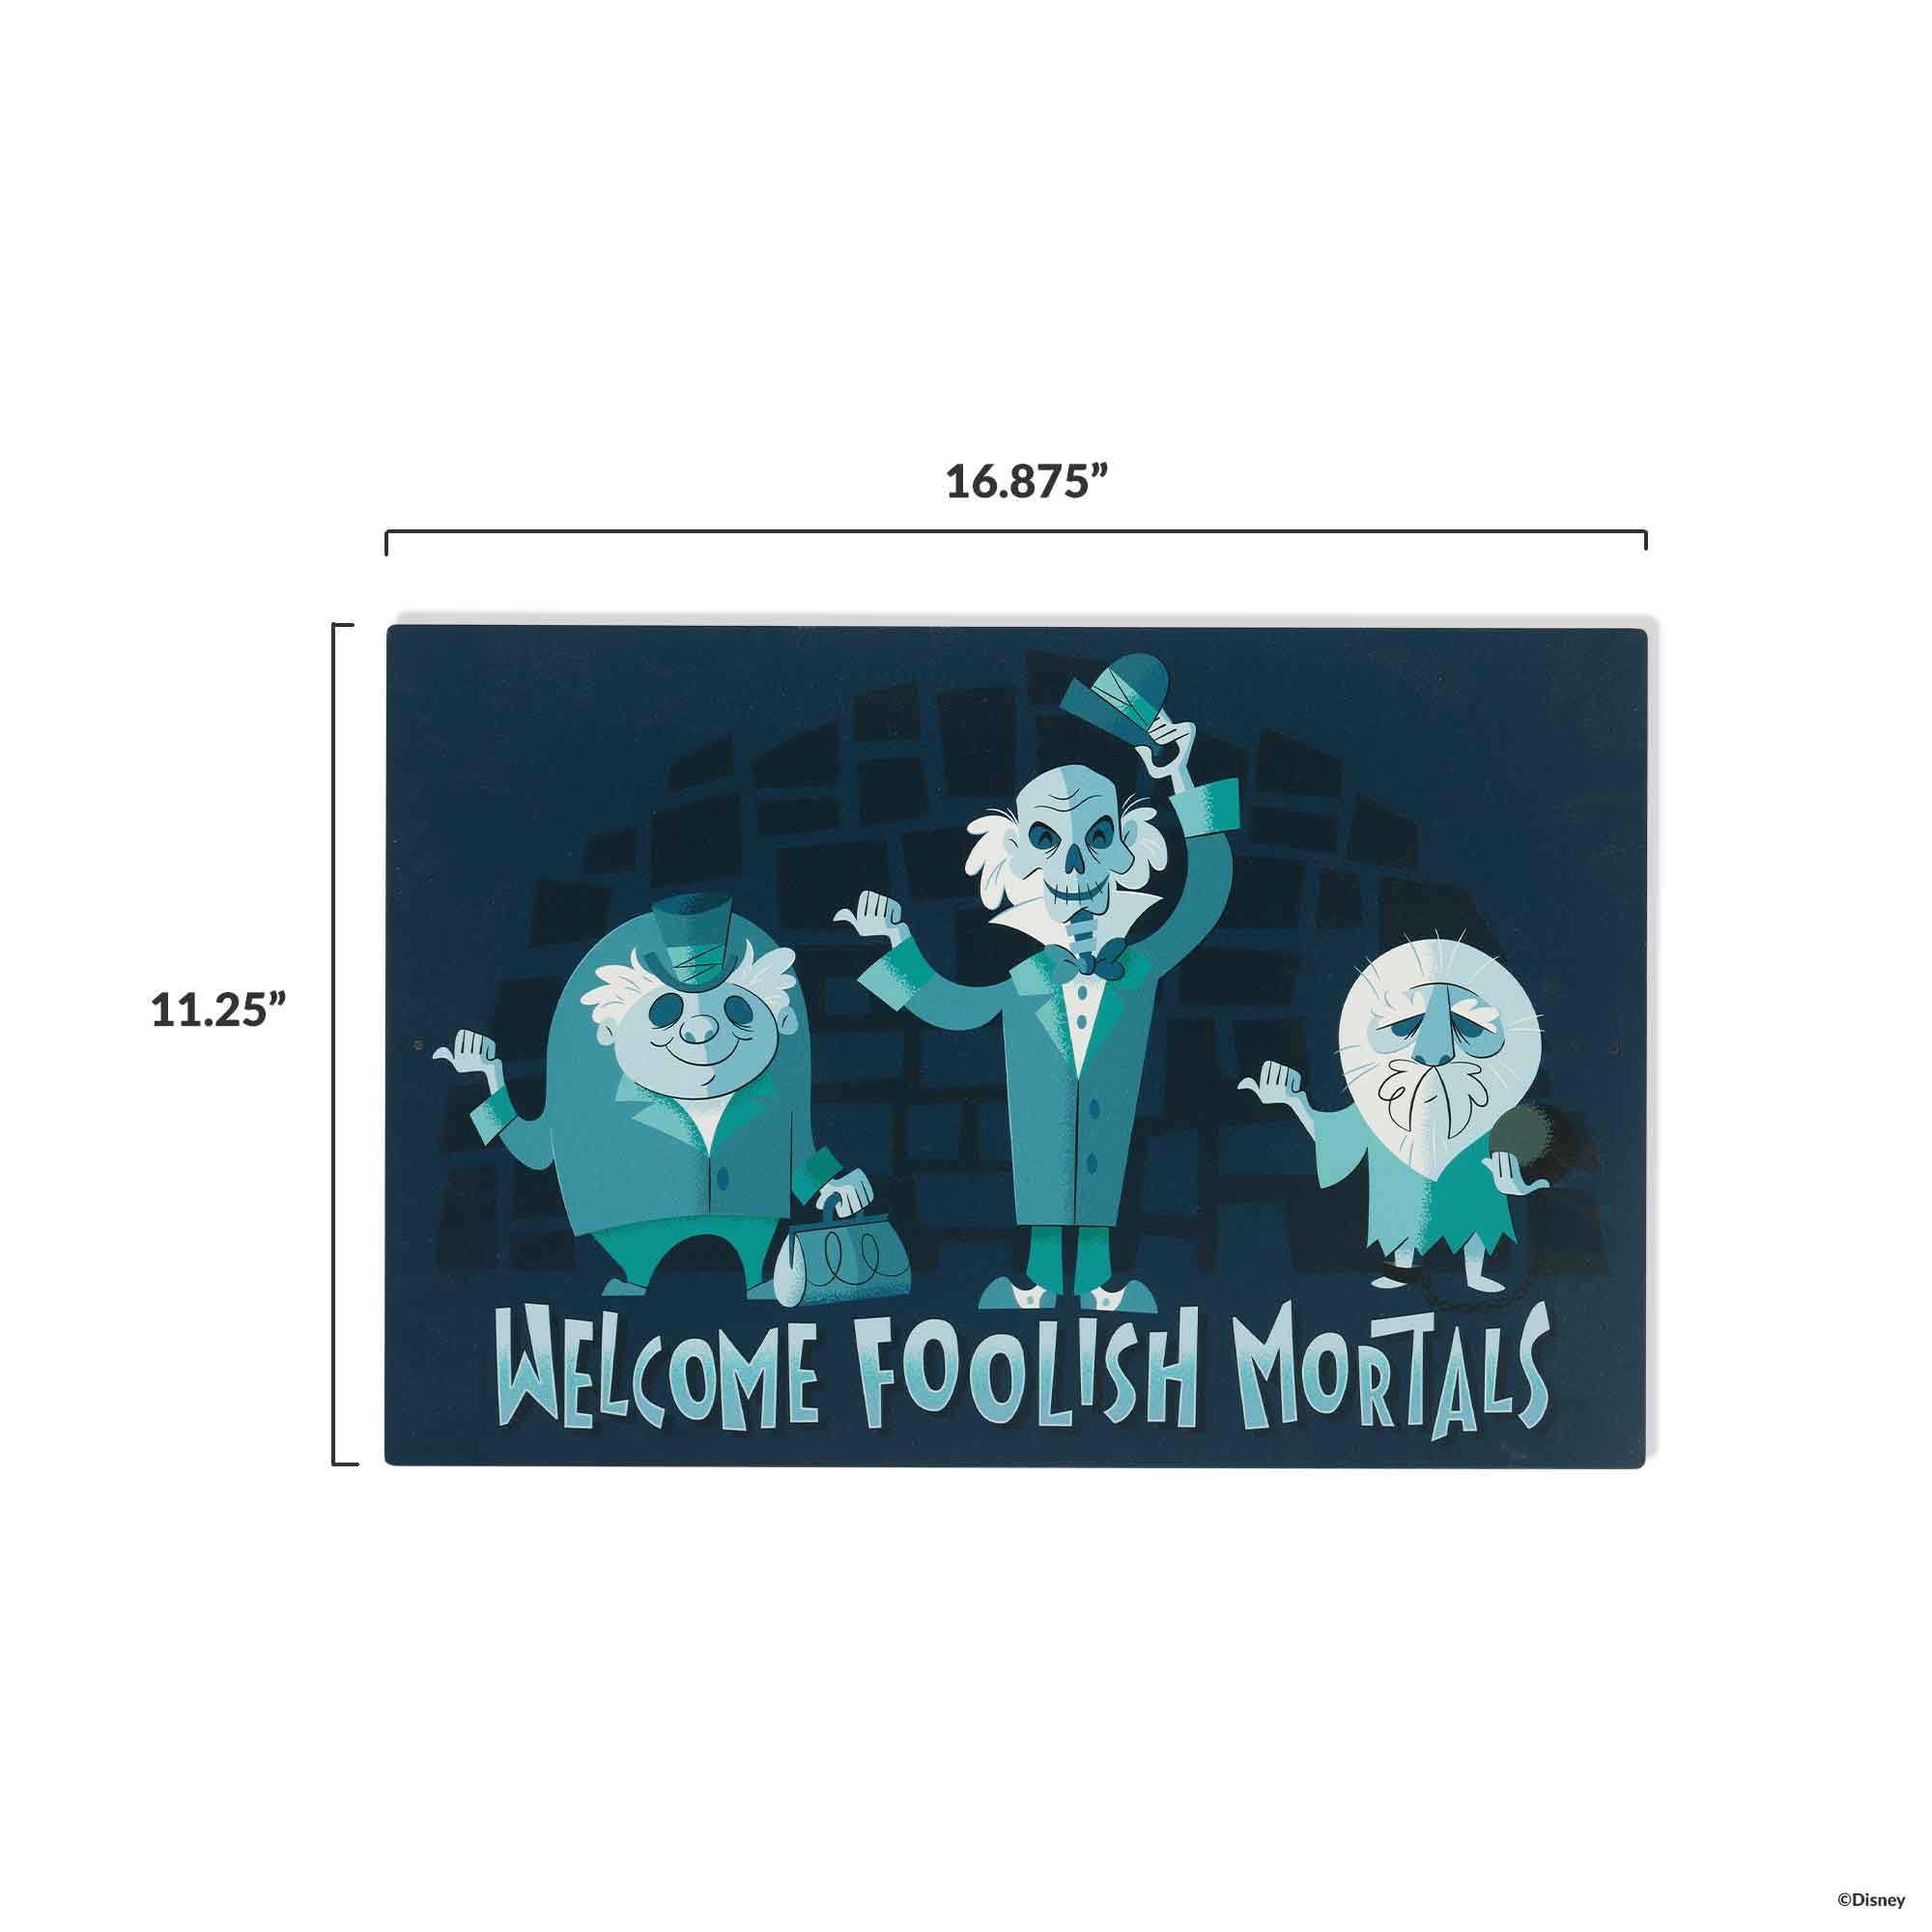 Disney Haunted Mansion Hitchhiking Ghosts Welcome Foolish Mortals Metal Sign - Fun Hitchhiking Ghosts Sign for Halloween Decor